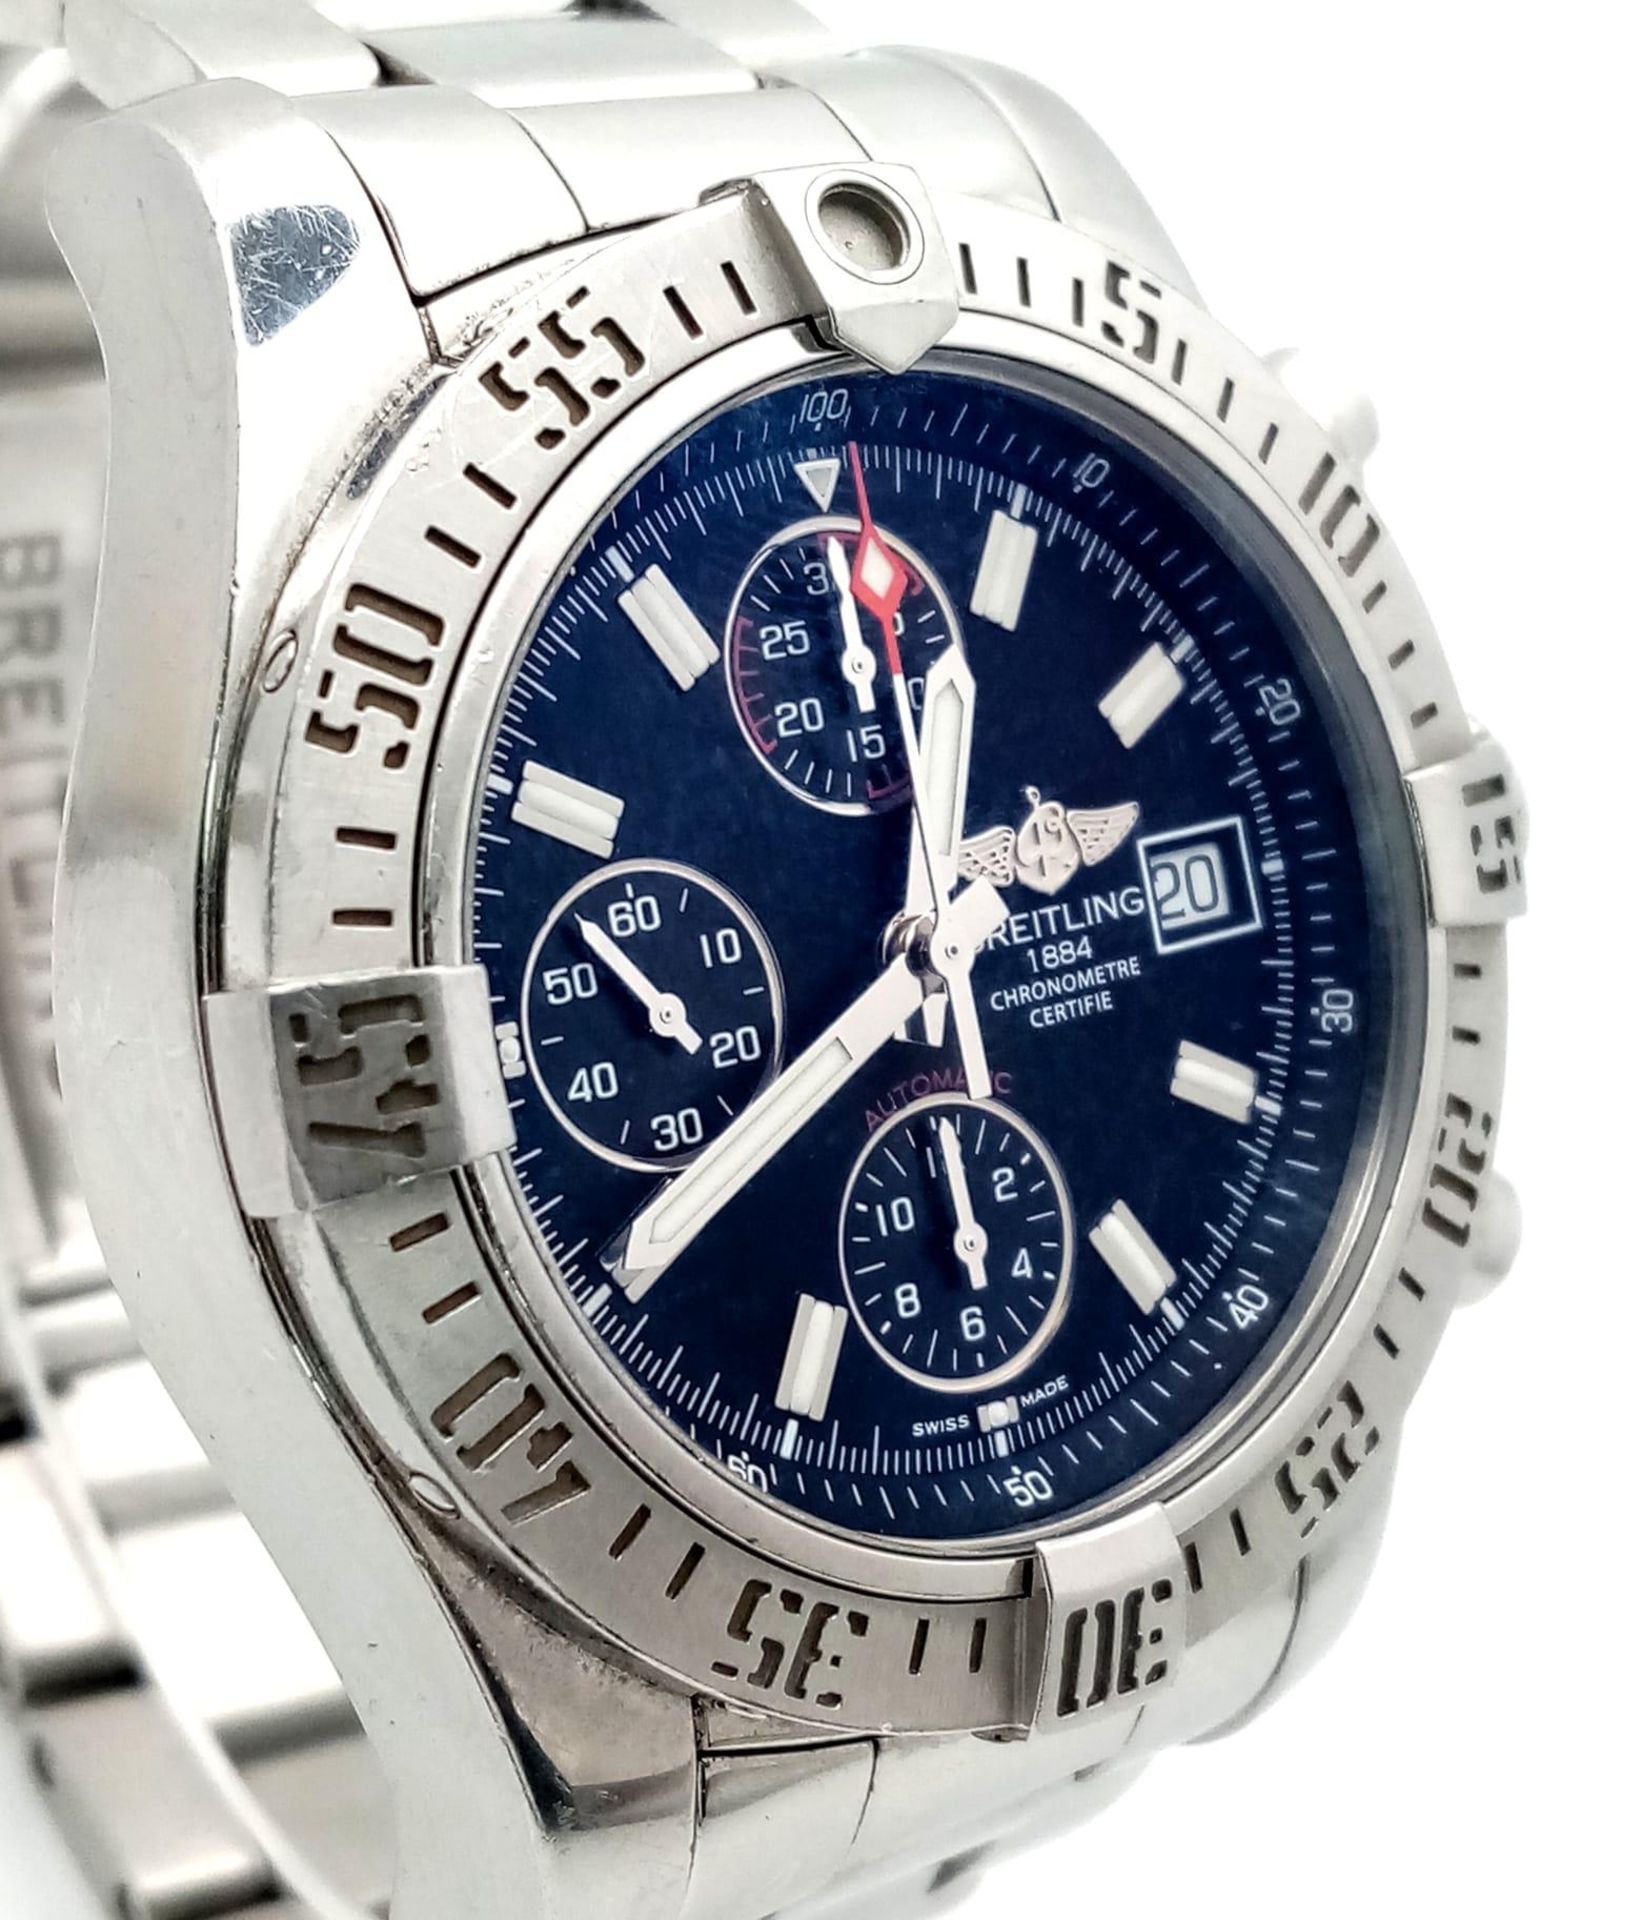 A Breitling Avenger II Chronograph Gents Watch. Stainless steel bracelet and case - 43mm. Black dial - Bild 3 aus 11